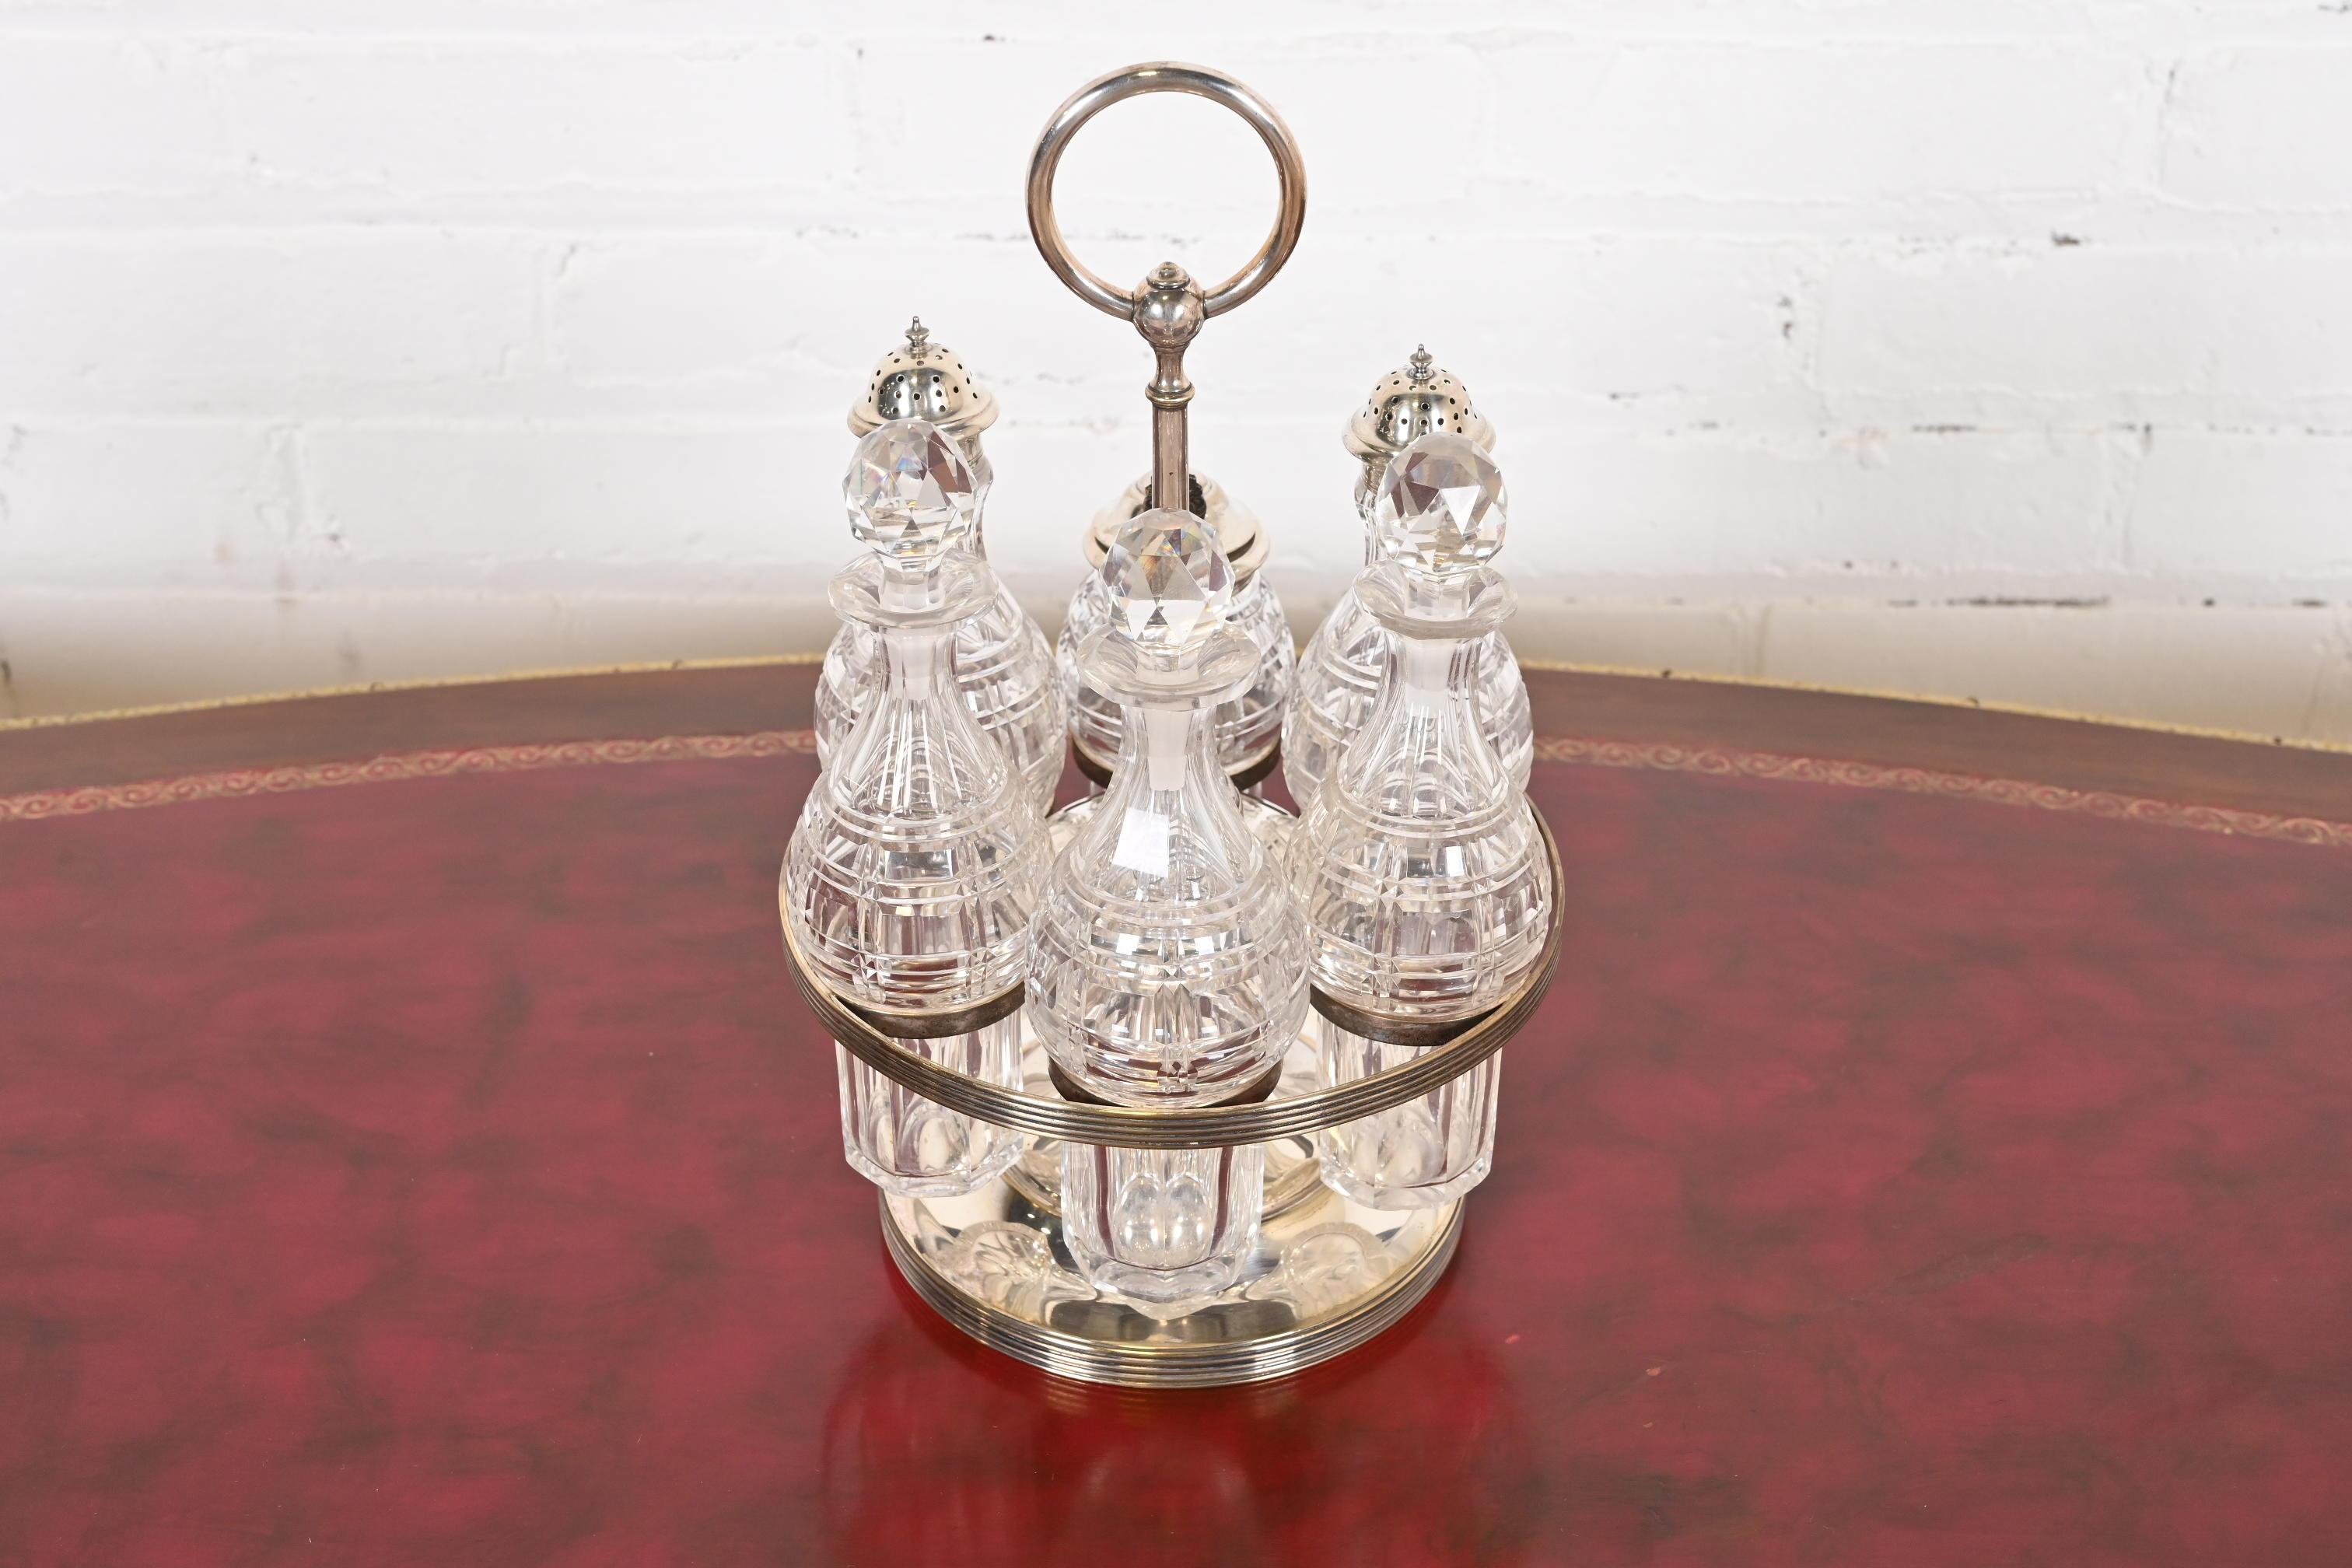 Tiffany & Co. Antique Silver Plate and Crystal Seven-Piece Cruet Set For Sale 4